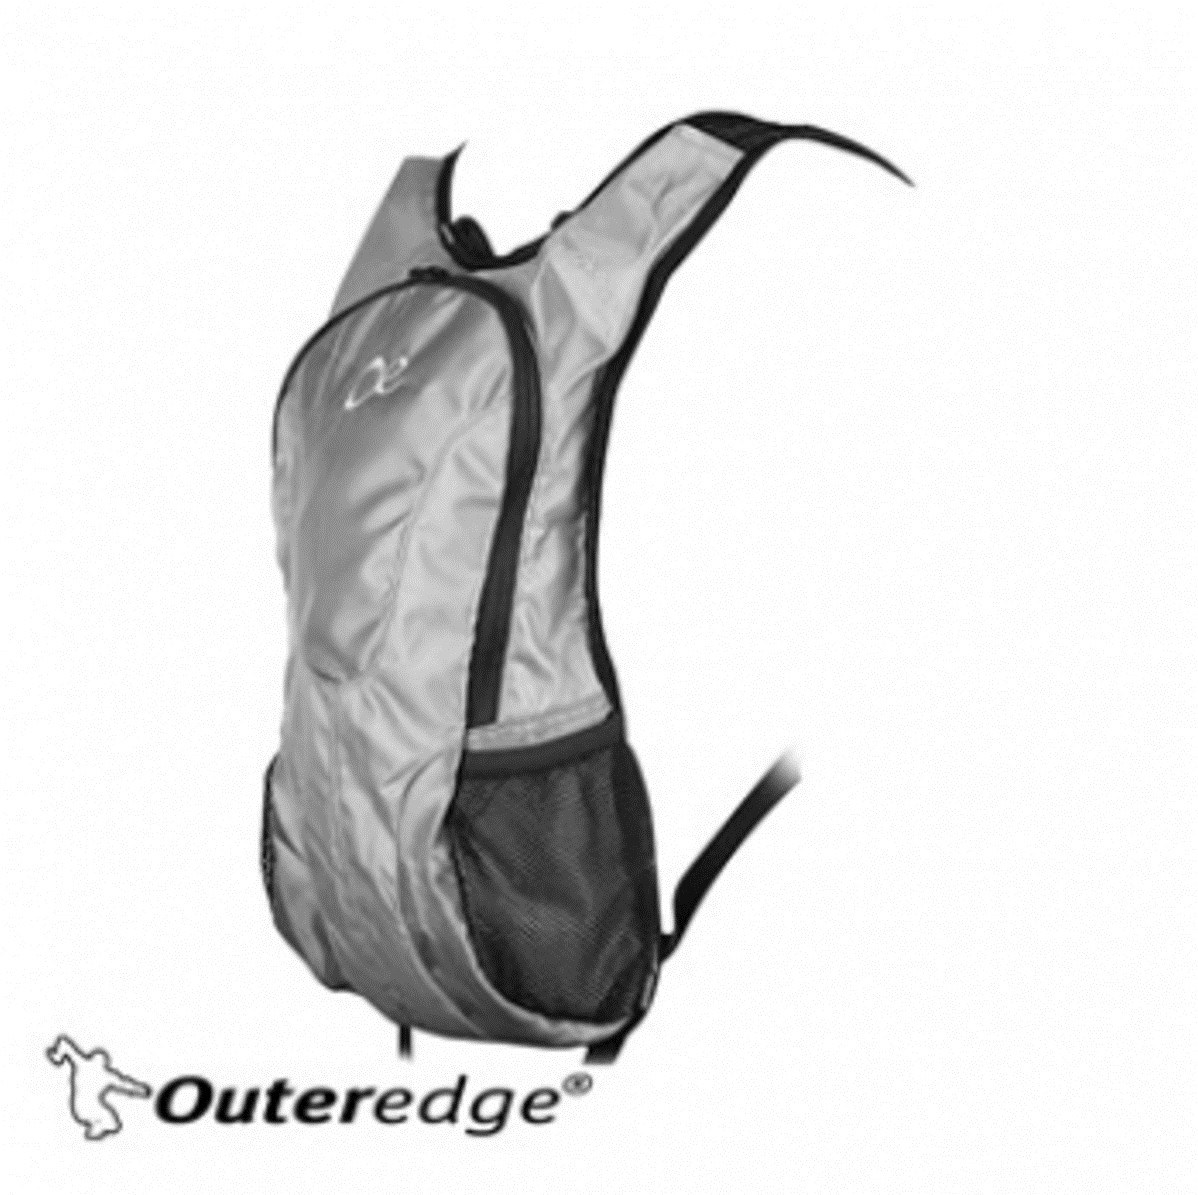 Outeredge Hydrorace Hydration Backpack product image